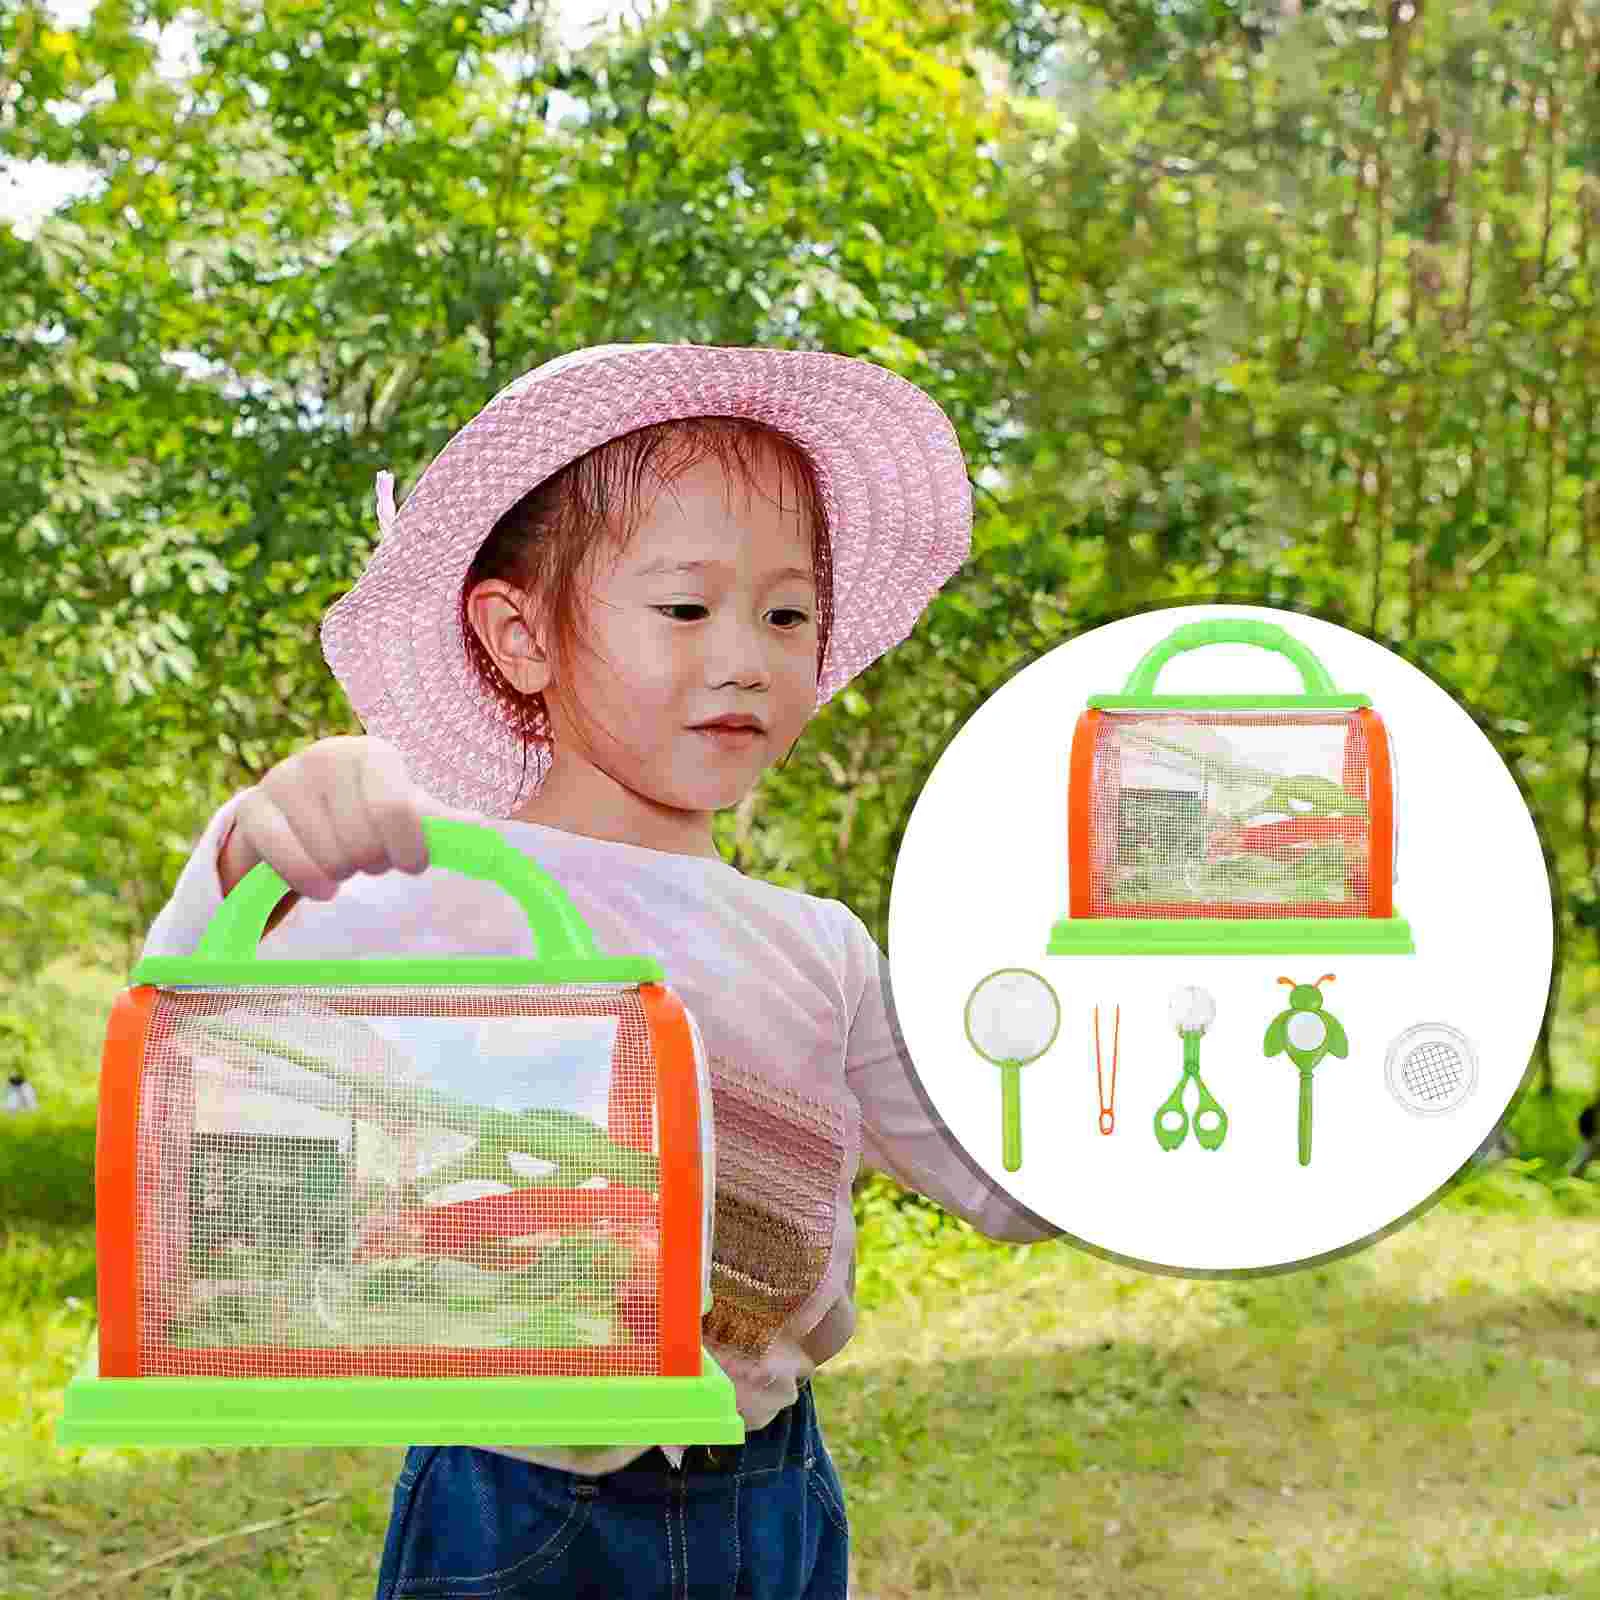 

Bug Kit Insect Catcher Toy Box Critter Observation Exploration Science Catching Kids Set Container Outdoor Collection Case